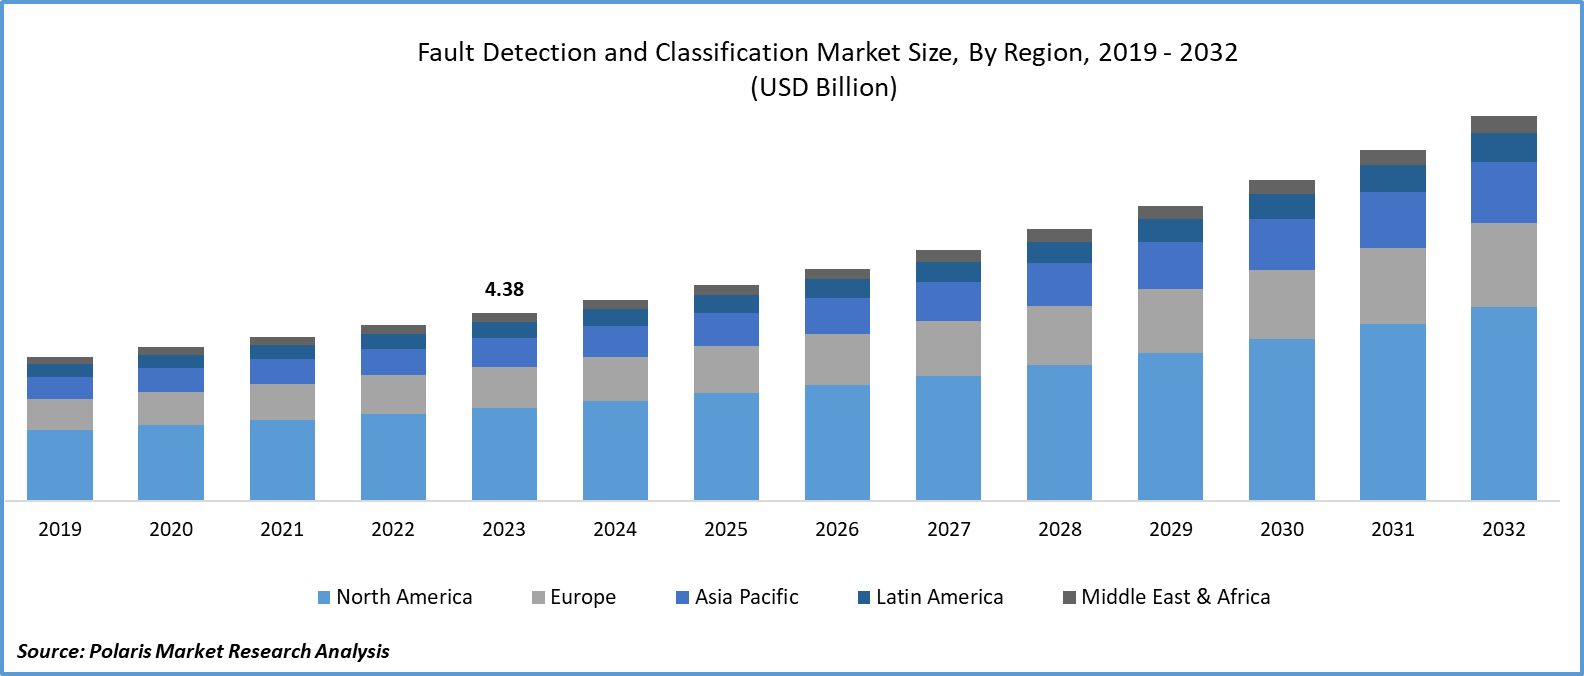 Fault Detection and Classification Market Size